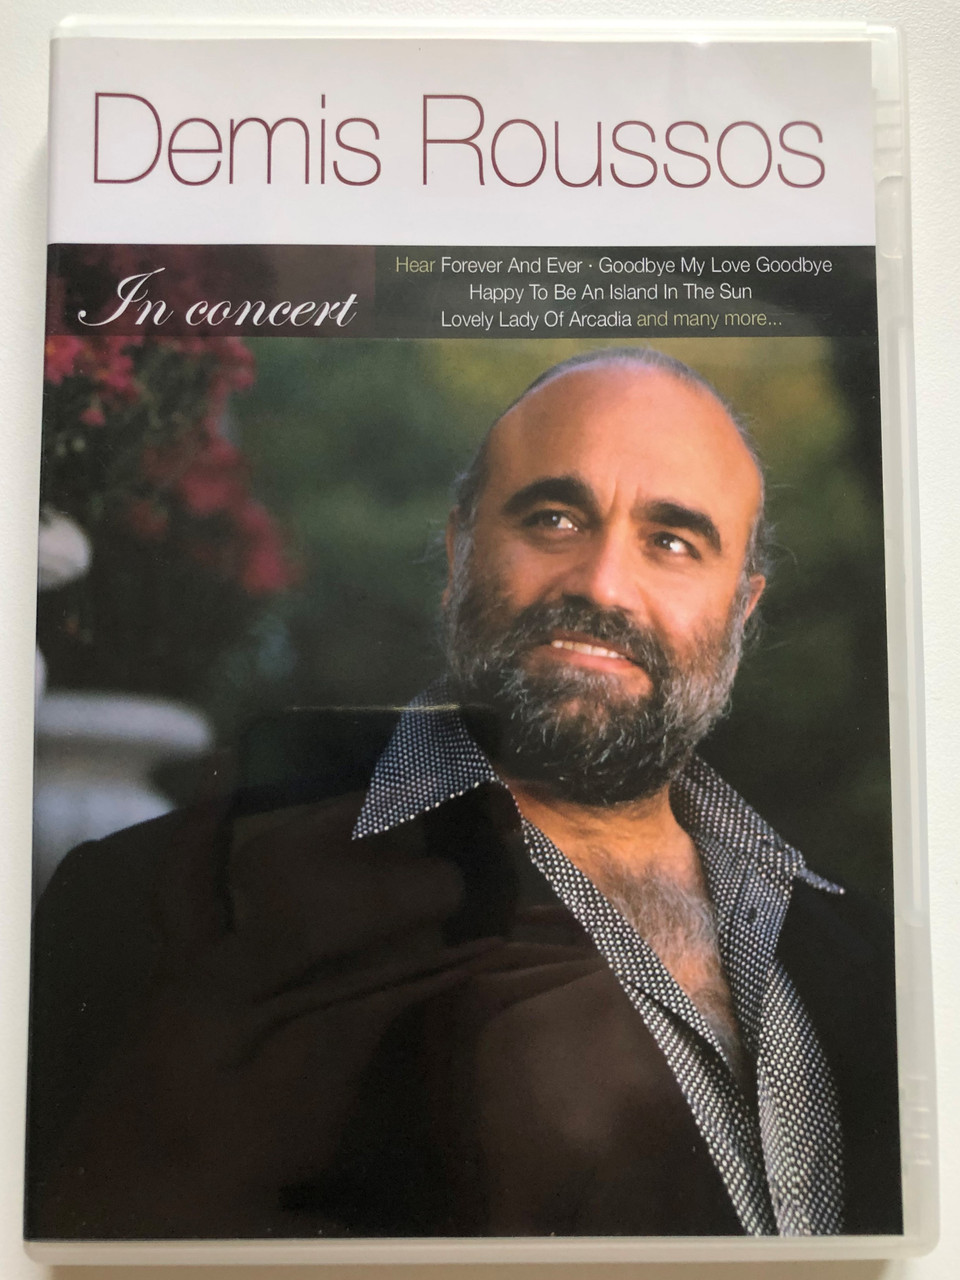 https://cdn10.bigcommerce.com/s-62bdpkt7pb/products/0/images/256762/Demis_Roussos_-_In_Concert_Hear_Forever_And_Ever_Goodbye_My_Love_Goodbye_Happy_To_Be_An_Island_In_The_Sun_Lovely_Lady_Of_Arcadia_and_many_more..._Elap_DVD_Video_CD_1991_80260716_1__56094.1666332413.1280.1280.JPG?c=2&_gl=1*3fbfgw*_ga*MjA2NTIxMjE2MC4xNTkwNTEyNTMy*_ga_WS2VZYPC6G*MTY2NjMzMTAzOS42MDEuMS4xNjY2MzMyMzczLjYwLjAuMA..